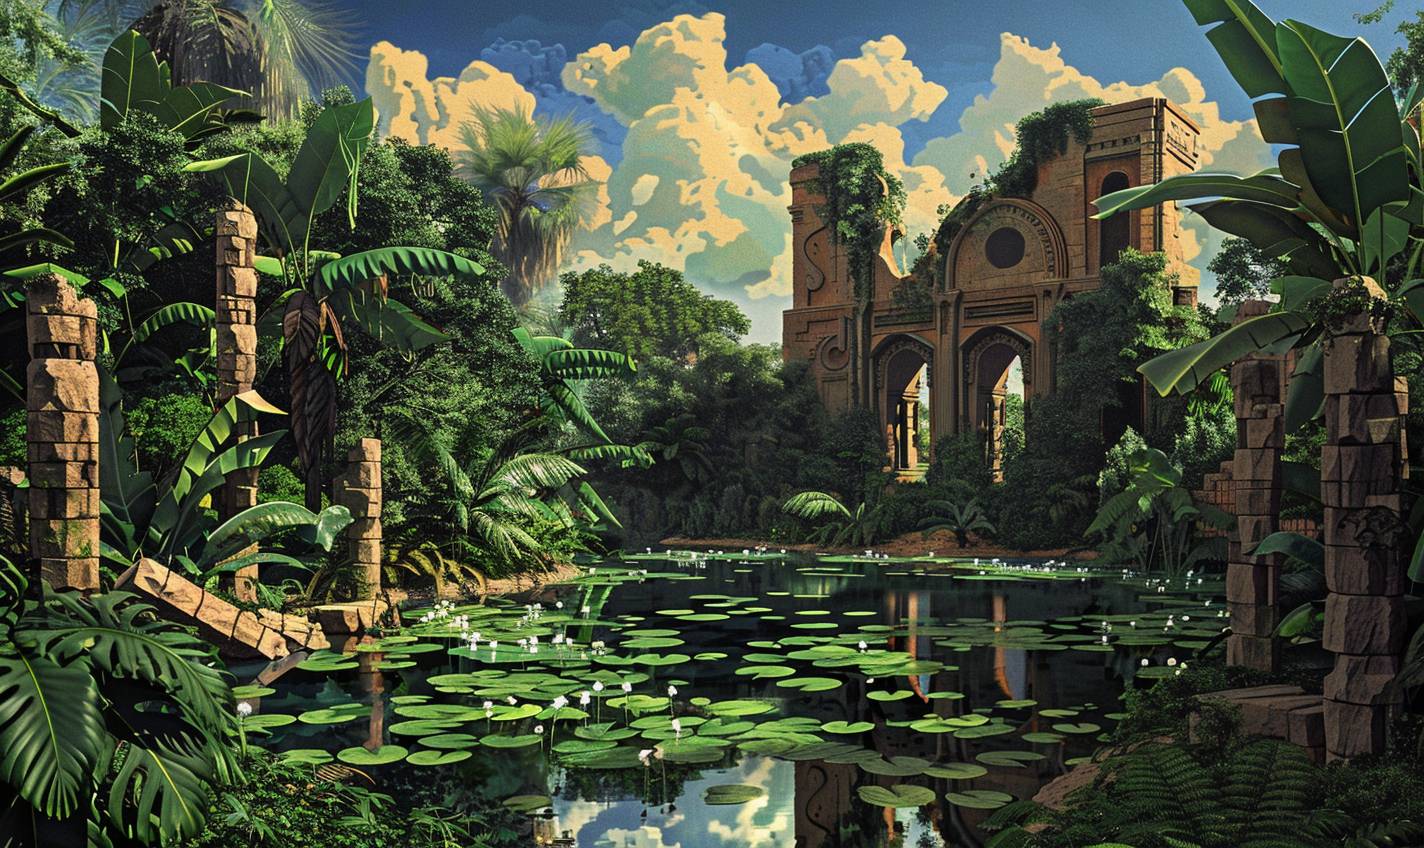 In the style of Henri Rousseau, Forgotten ruins of a lost civilization